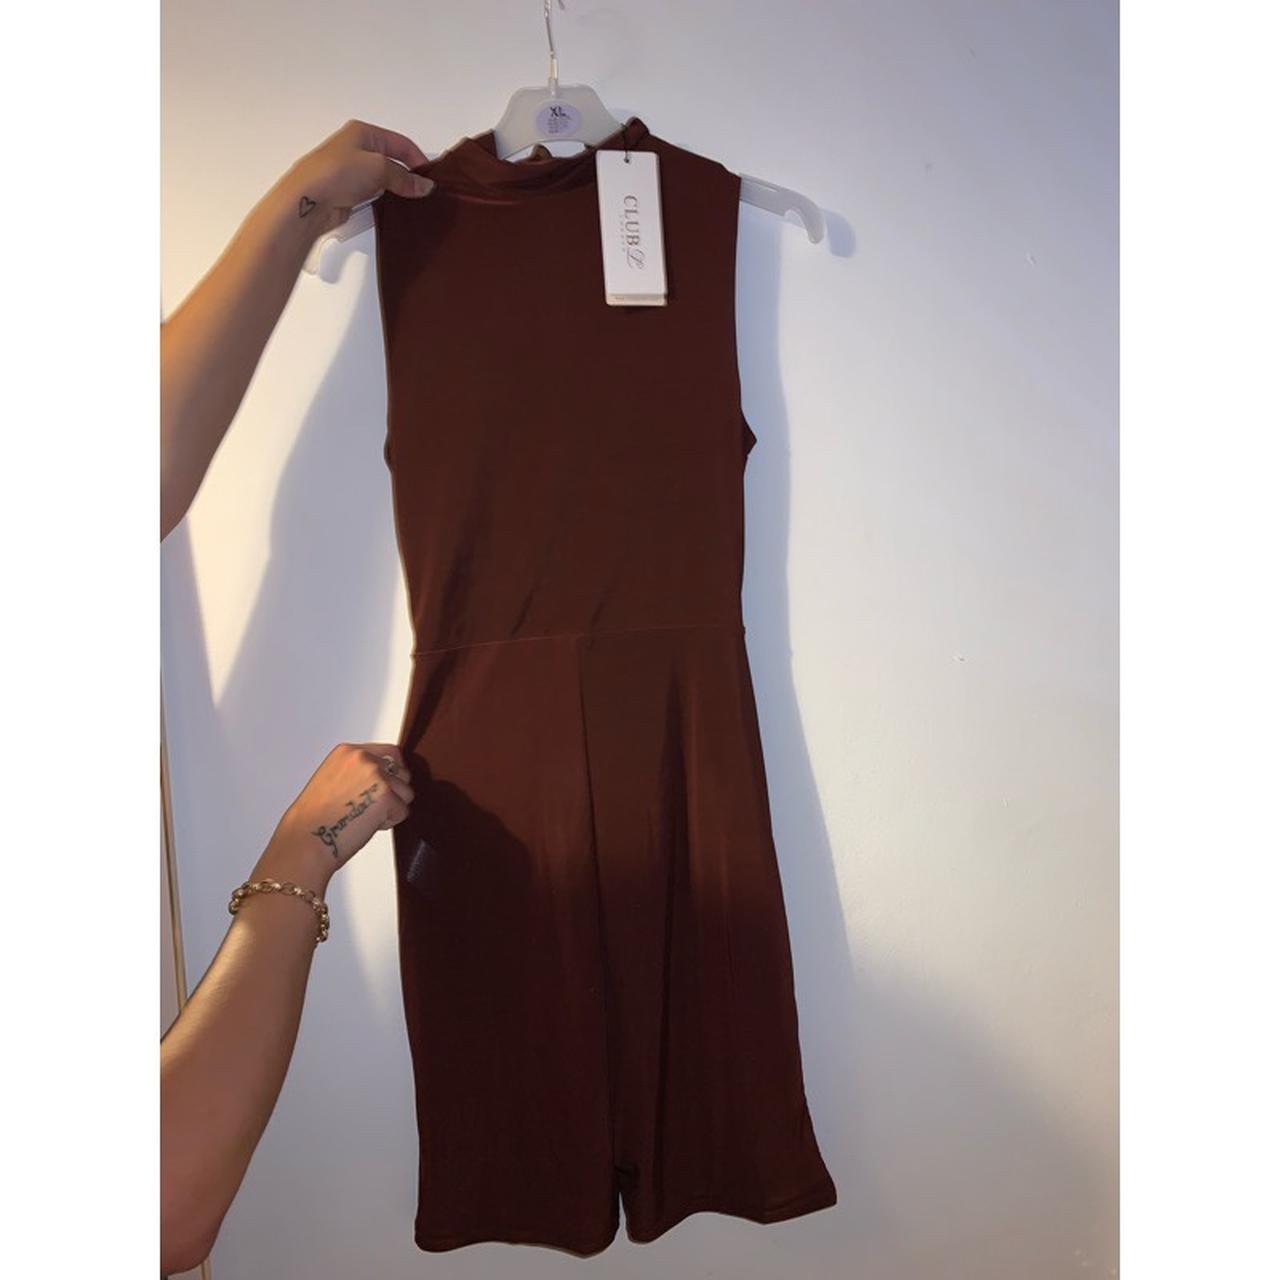 Body suit from tk max brand new with tags only tried on - Depop